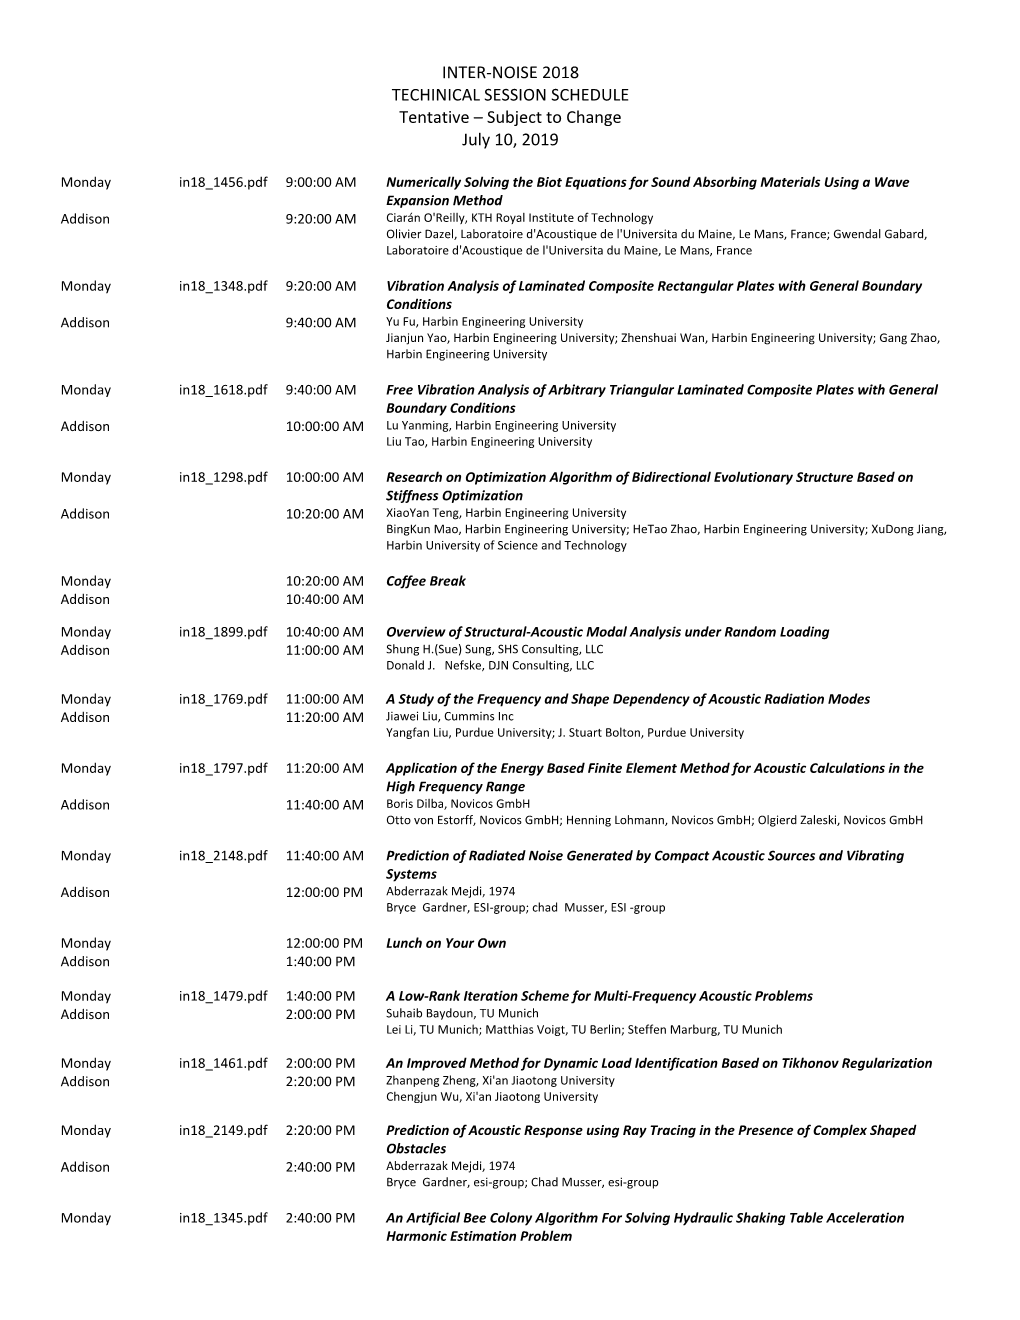 INTER-NOISE 2018 TECHINICAL SESSION SCHEDULE Tentative – Subject to Change July 10, 2019